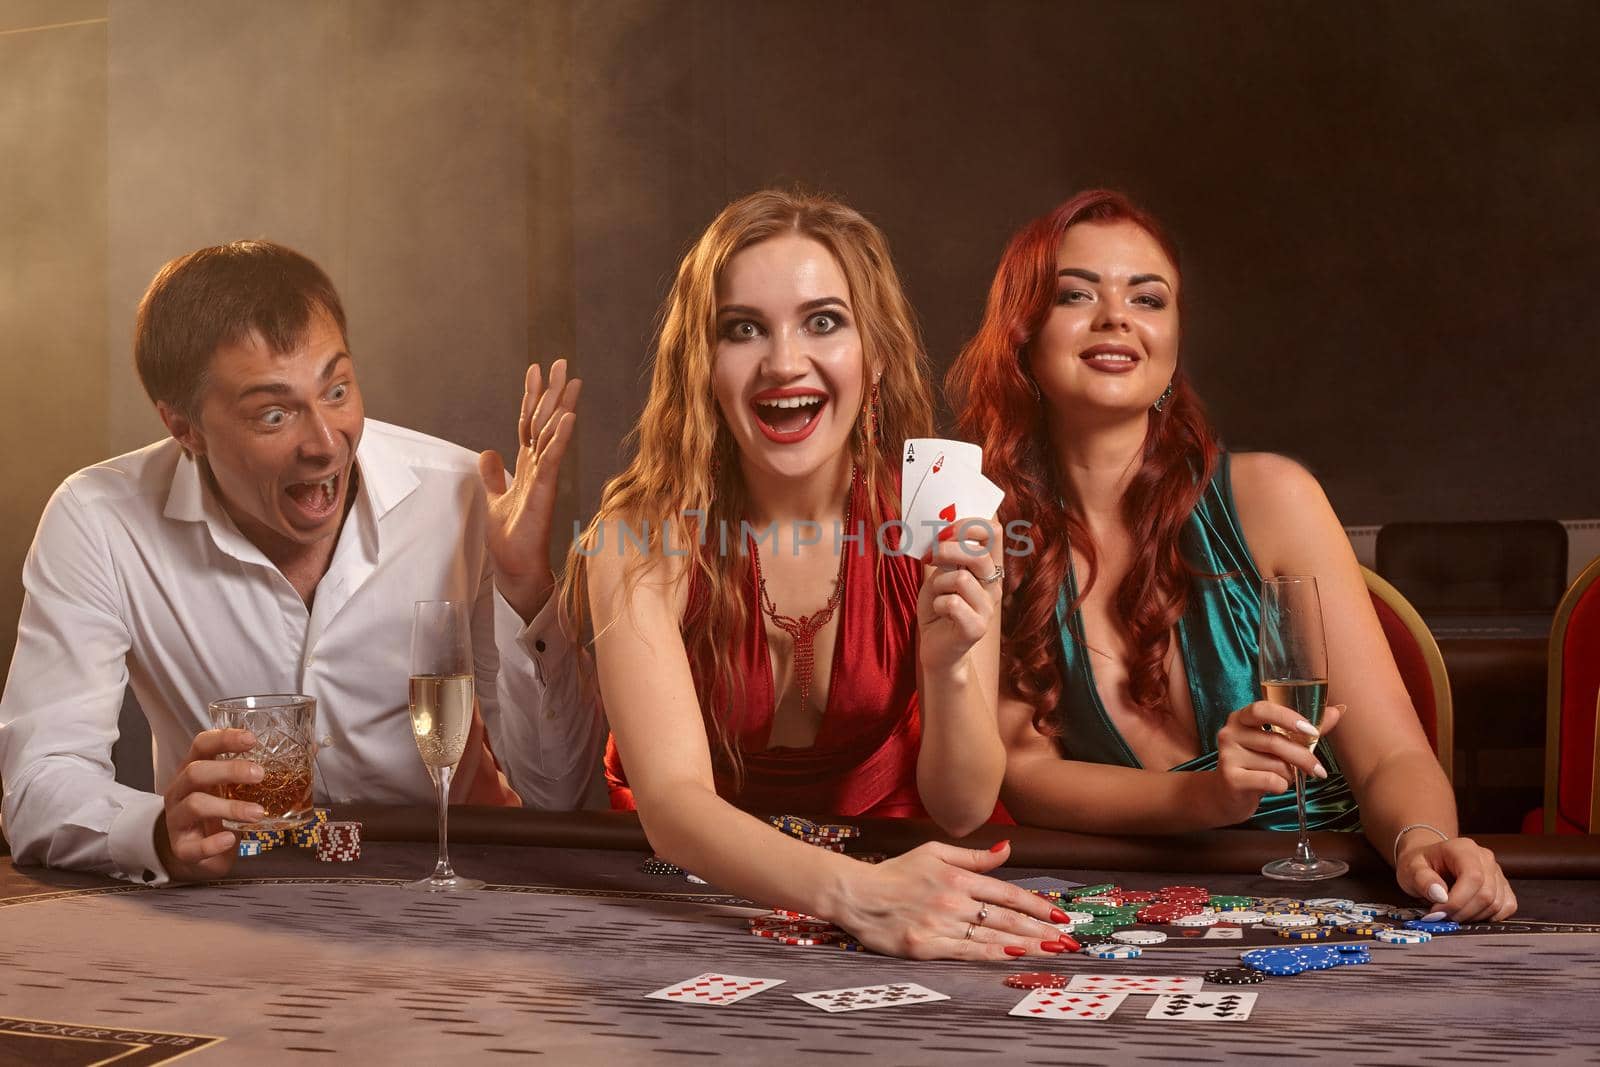 Group of a funny friends are playing poker at casino. They are celebrating their win, looking at the camera and smiling while showing the winning combination and posing sitting at the table against a dark smoke background. Cards, chips, money, gambling, entertainment concept.